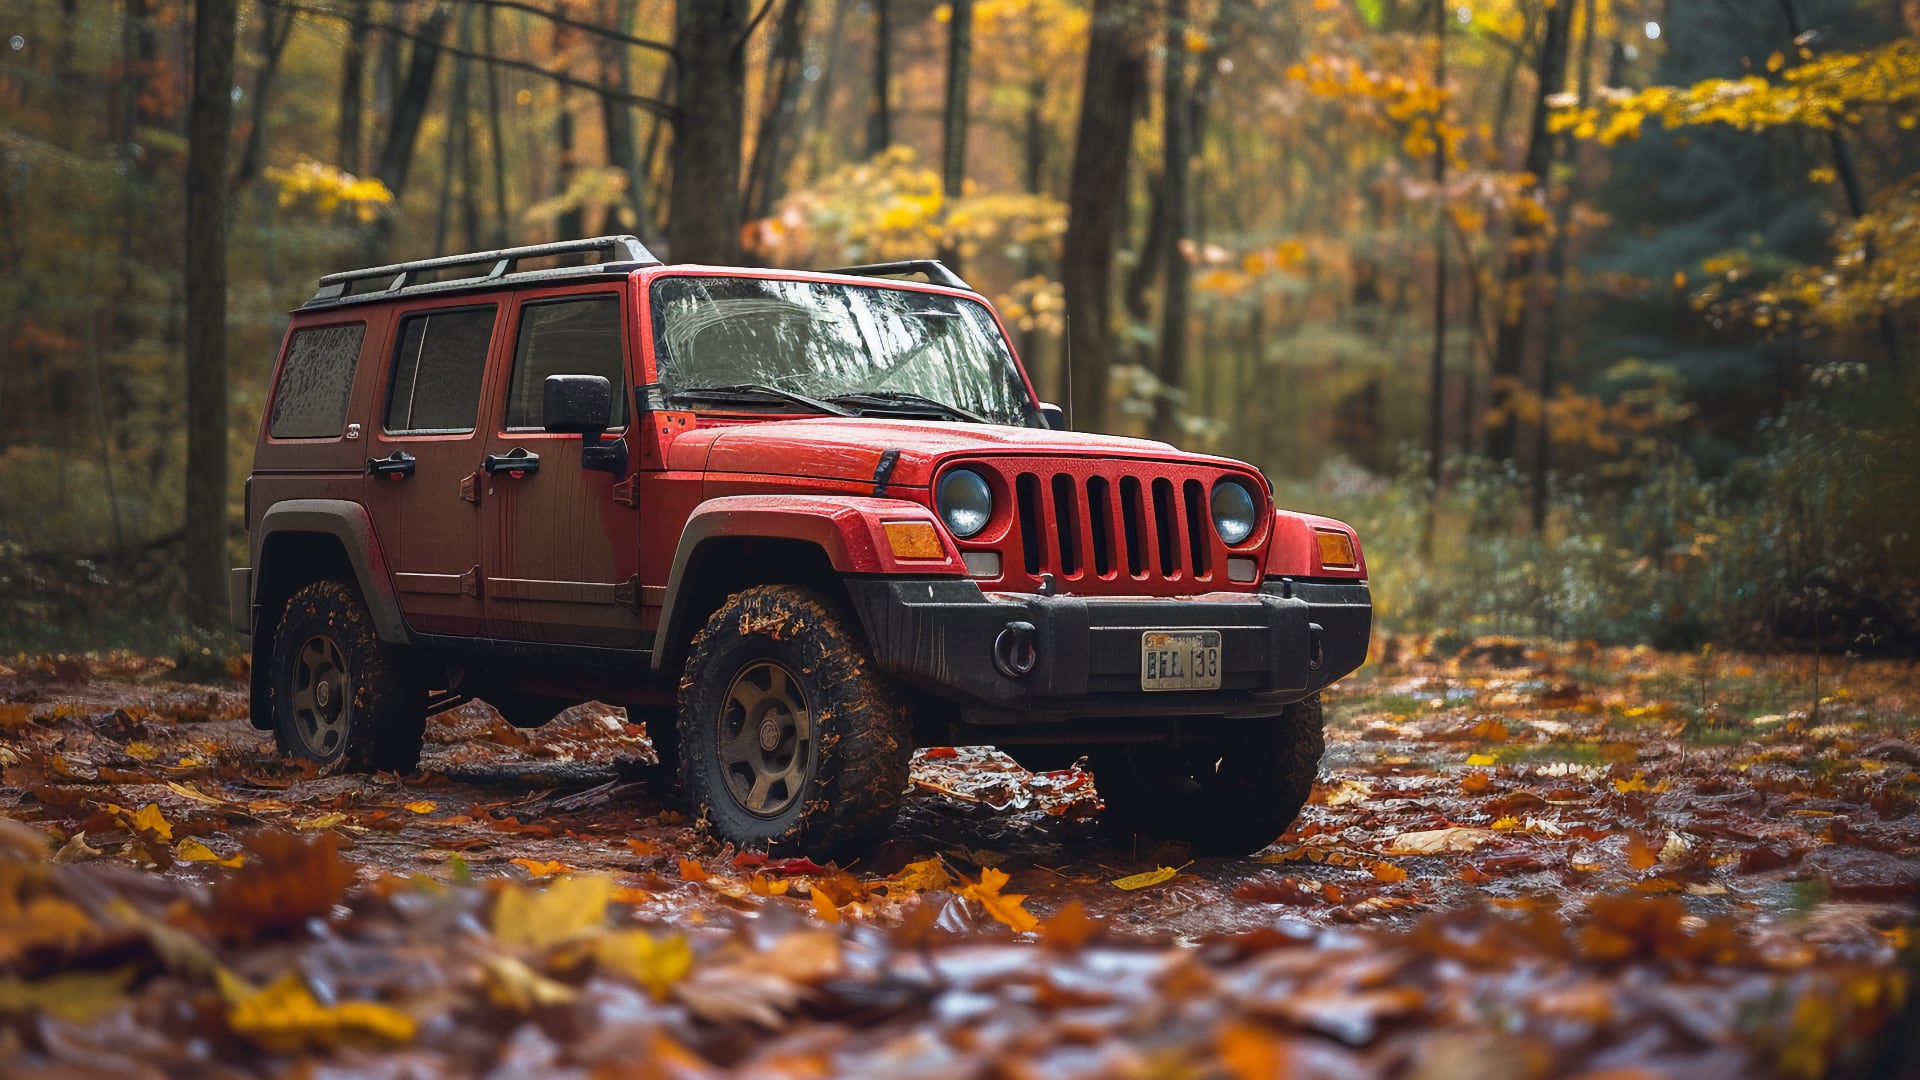 A red Jeep Patriot in the woods.